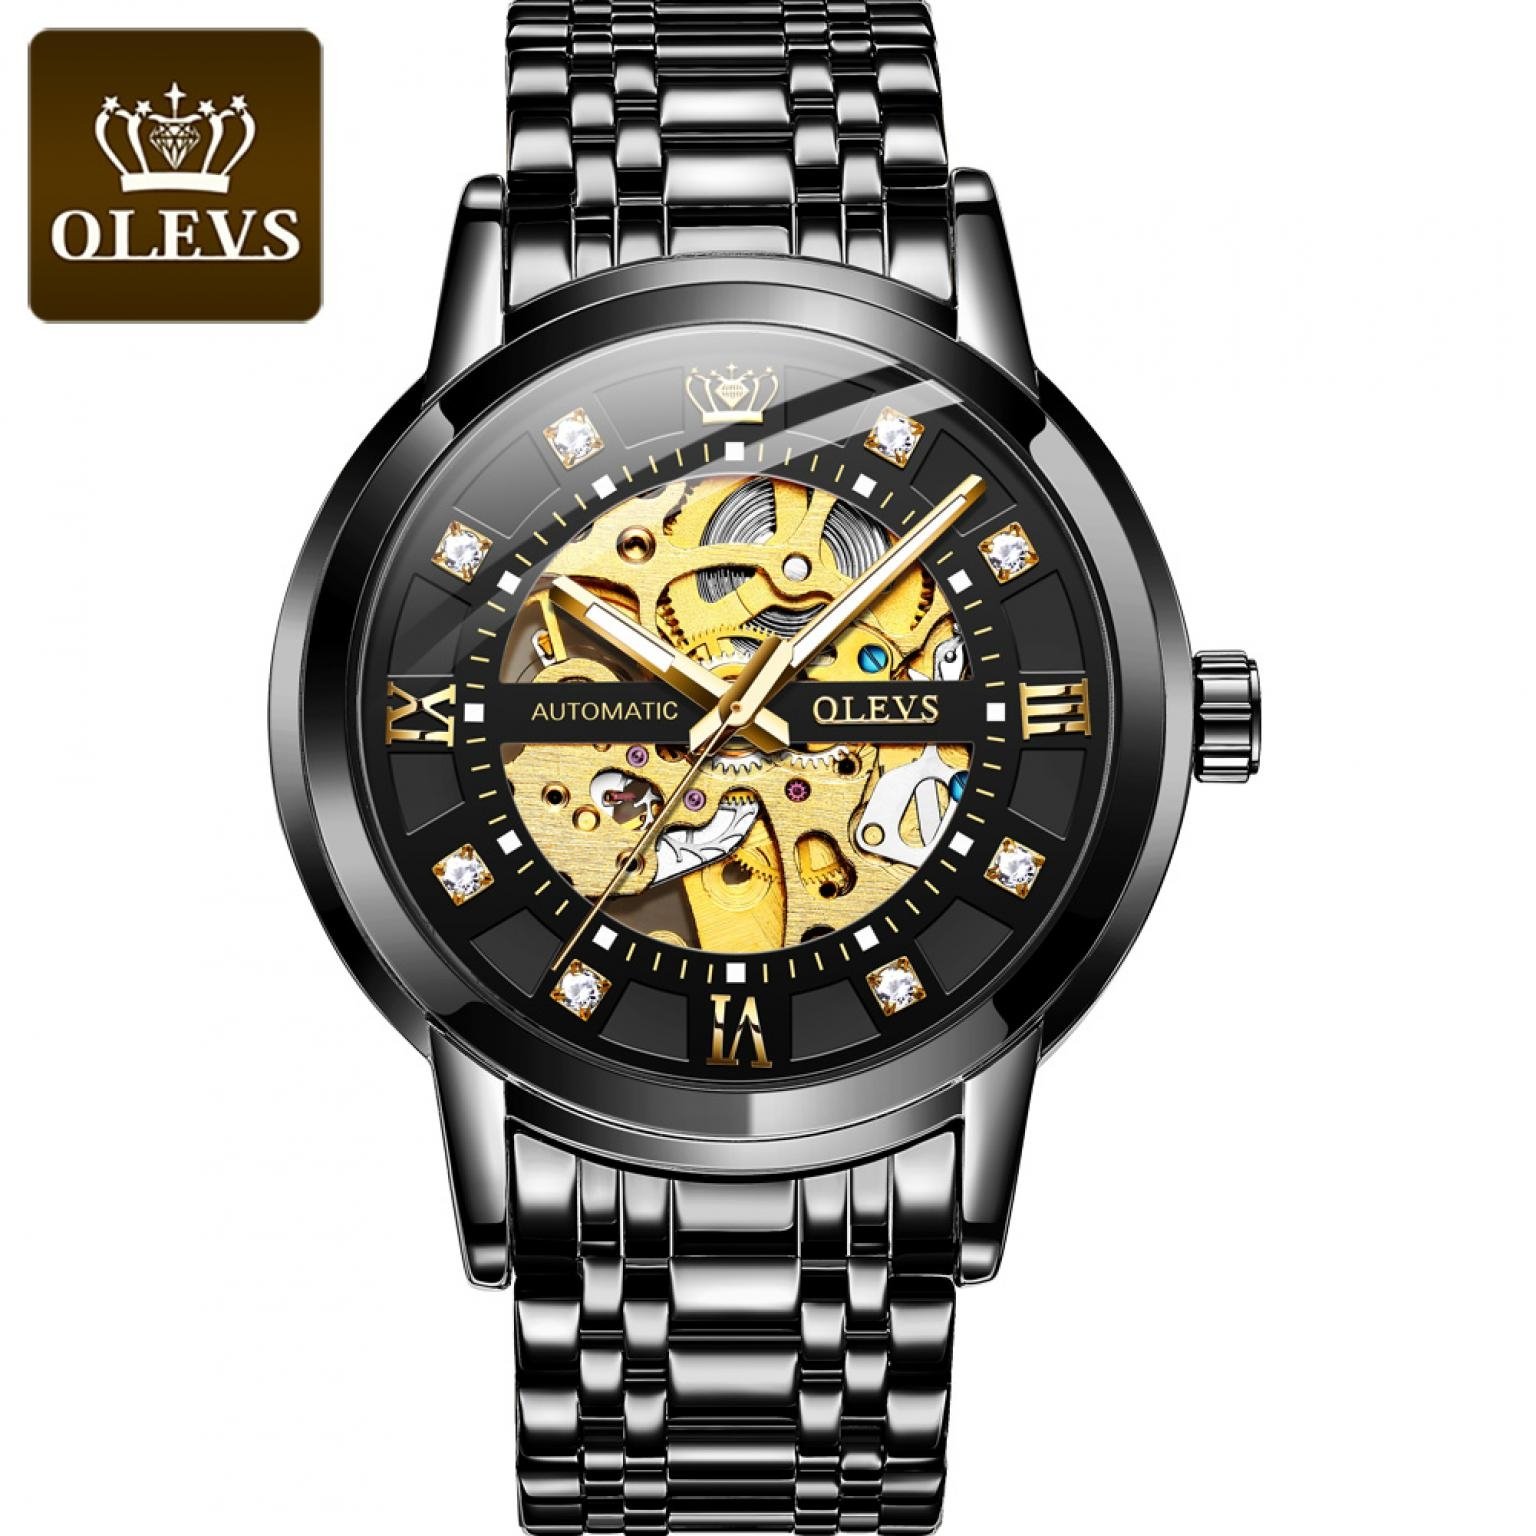 Genuine OLEVS Watches for Men Top Brand Luxury Automatic Mechanical Business Hight Quality Clock Gold Watch (OLEVS 9901)